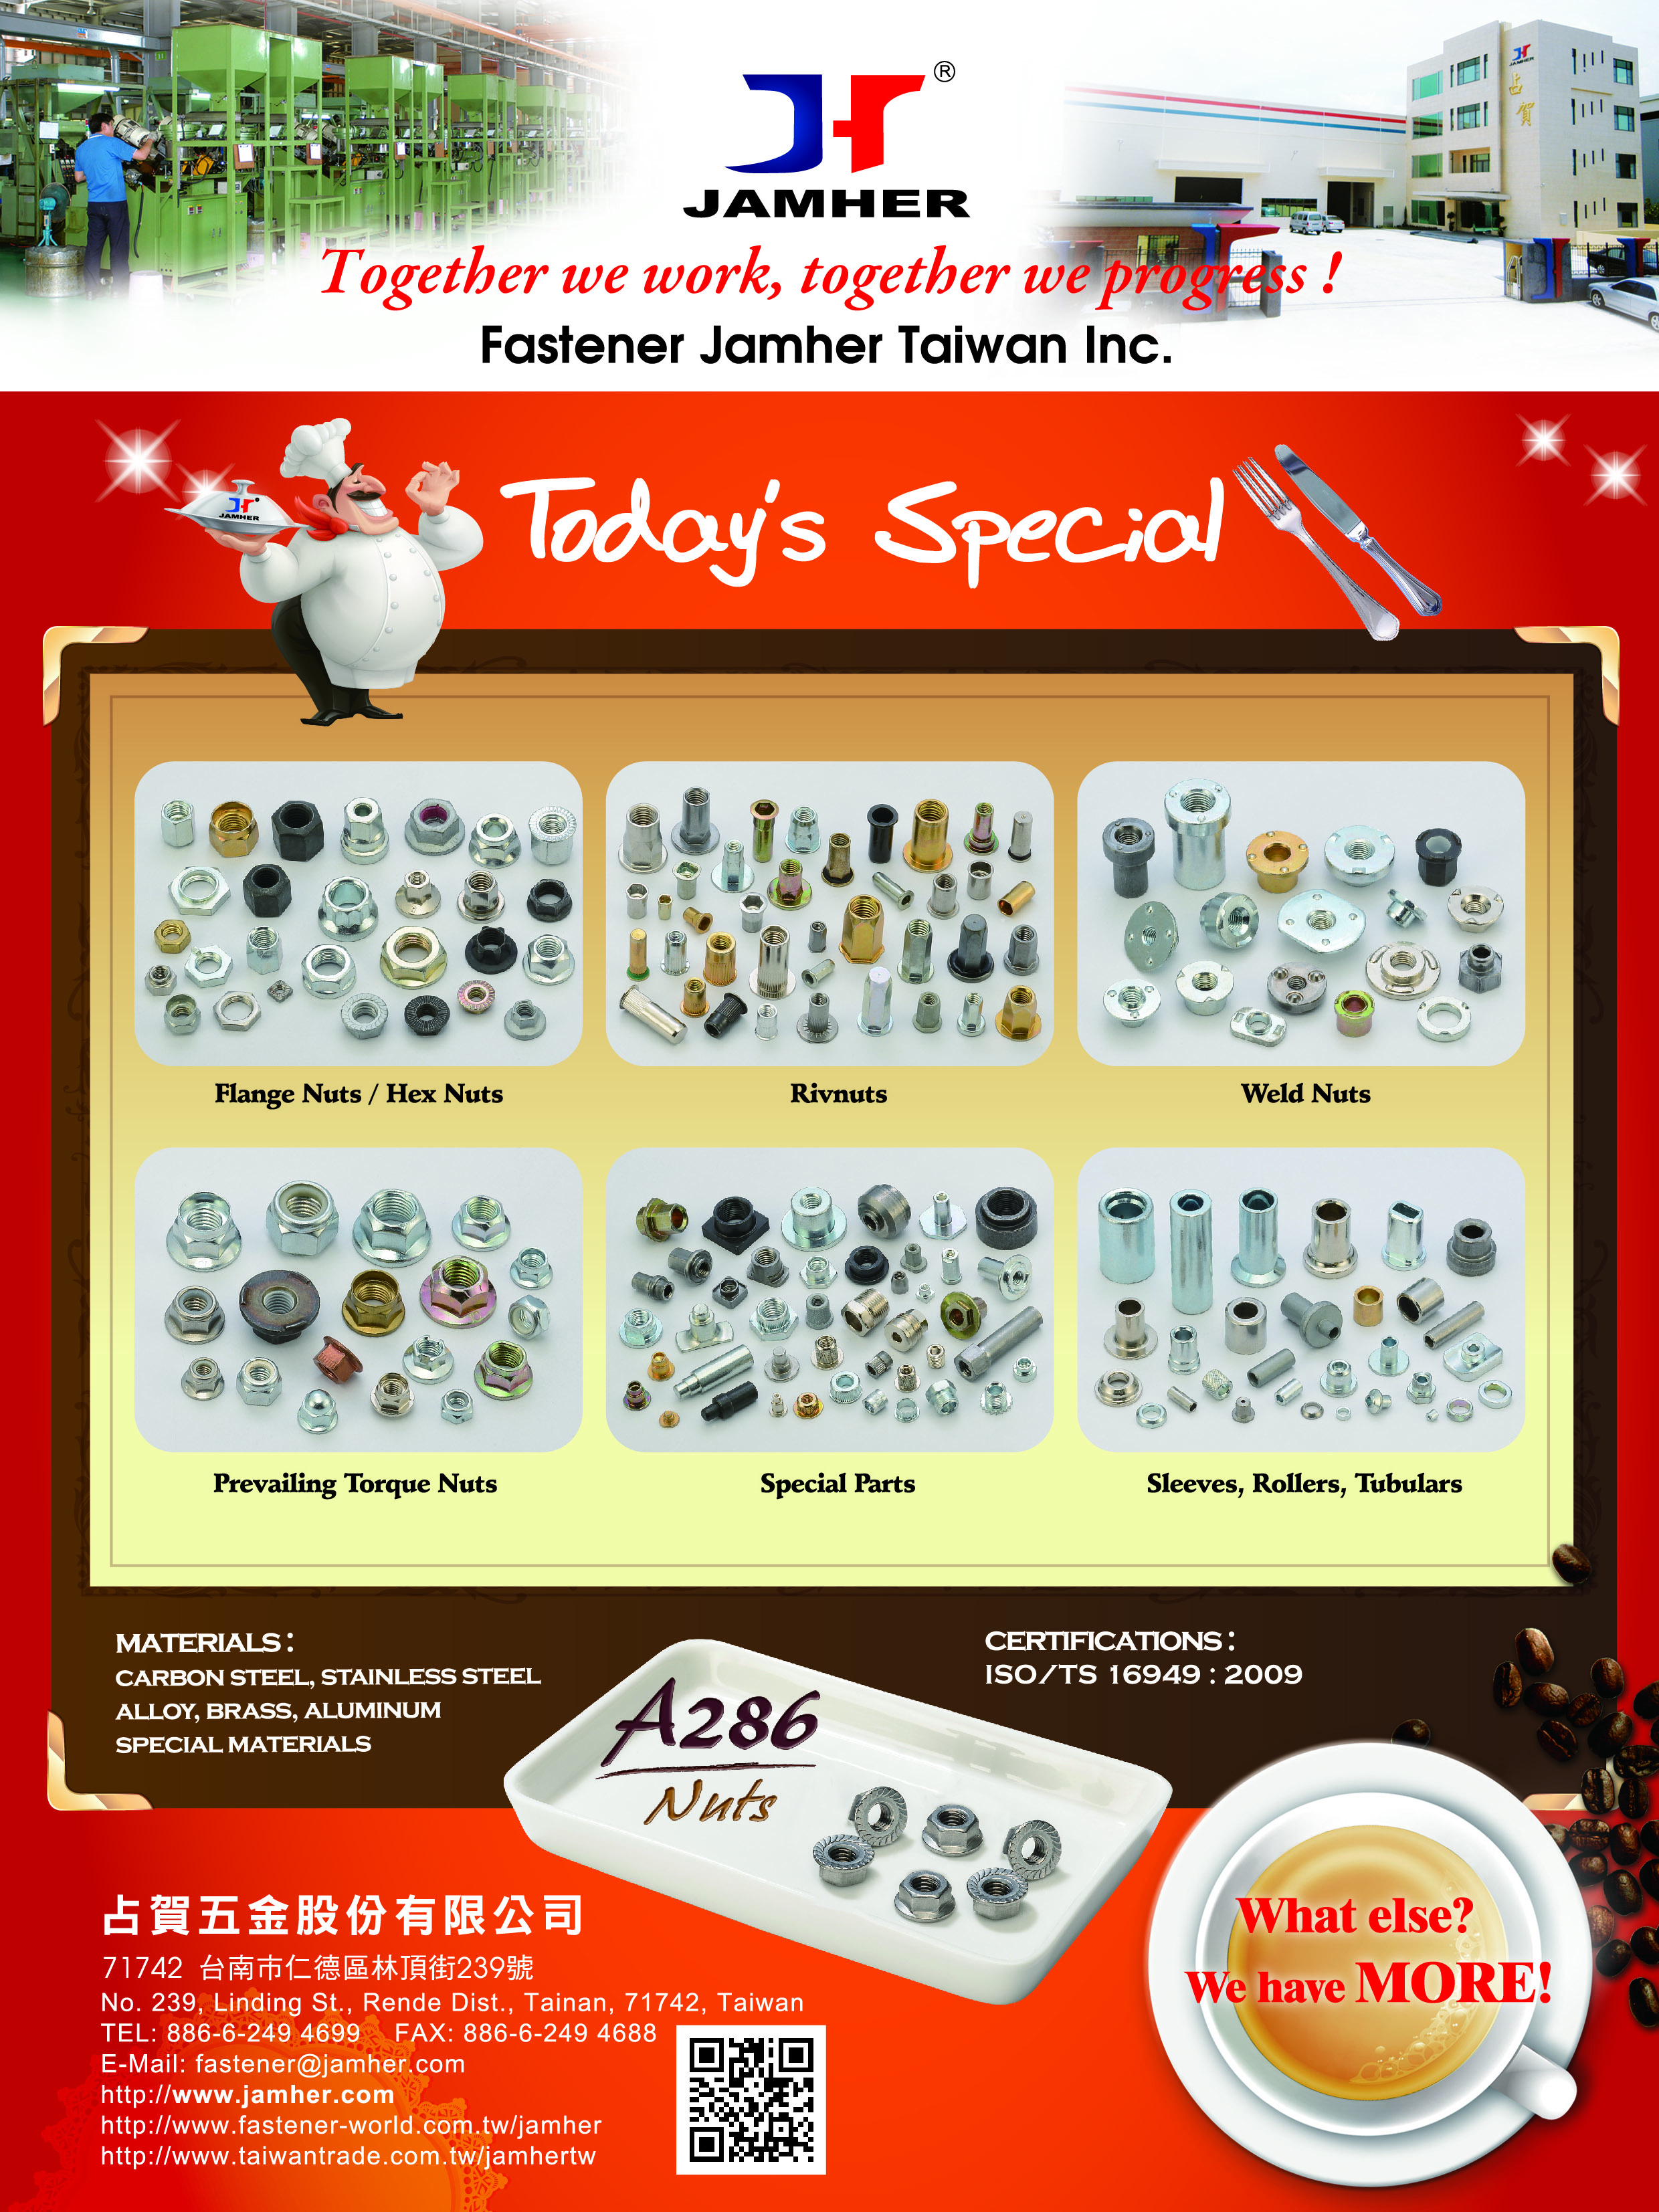 FASTENER JAMHER TAIWAN INC. _Online Catalogues